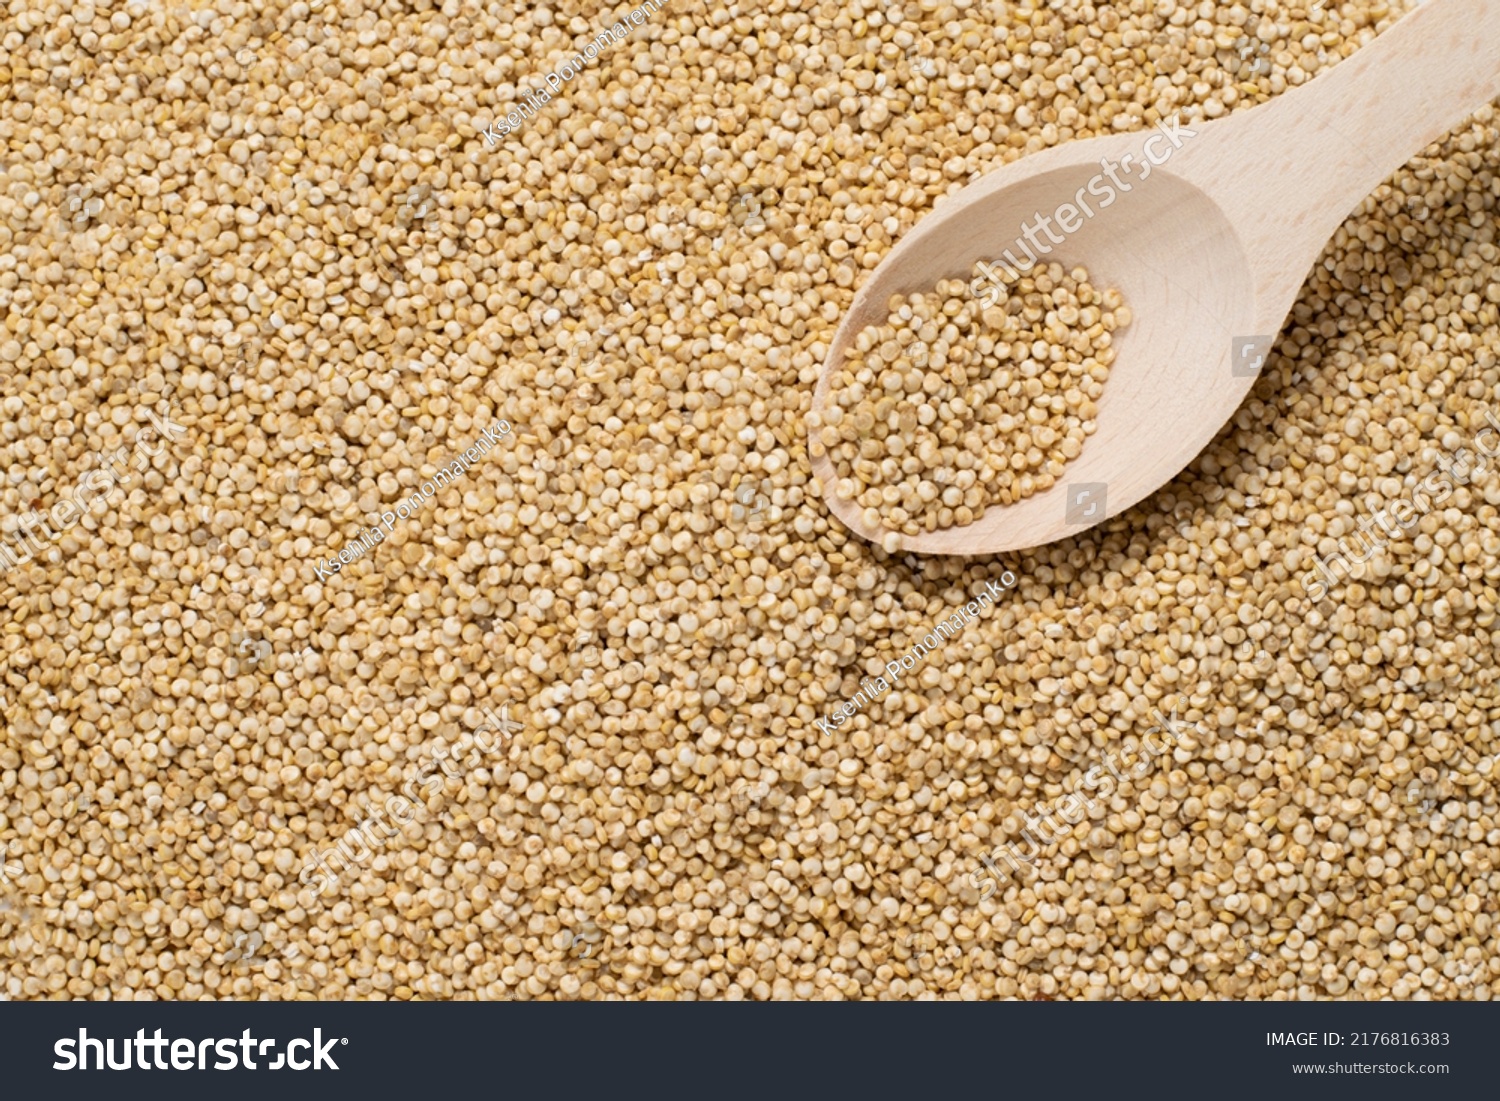 Grains of uncooked white quinoa and a wooden spoon with seeds on it. Top view, space for text, copy space, quinoa grains as texture, background. #2176816383